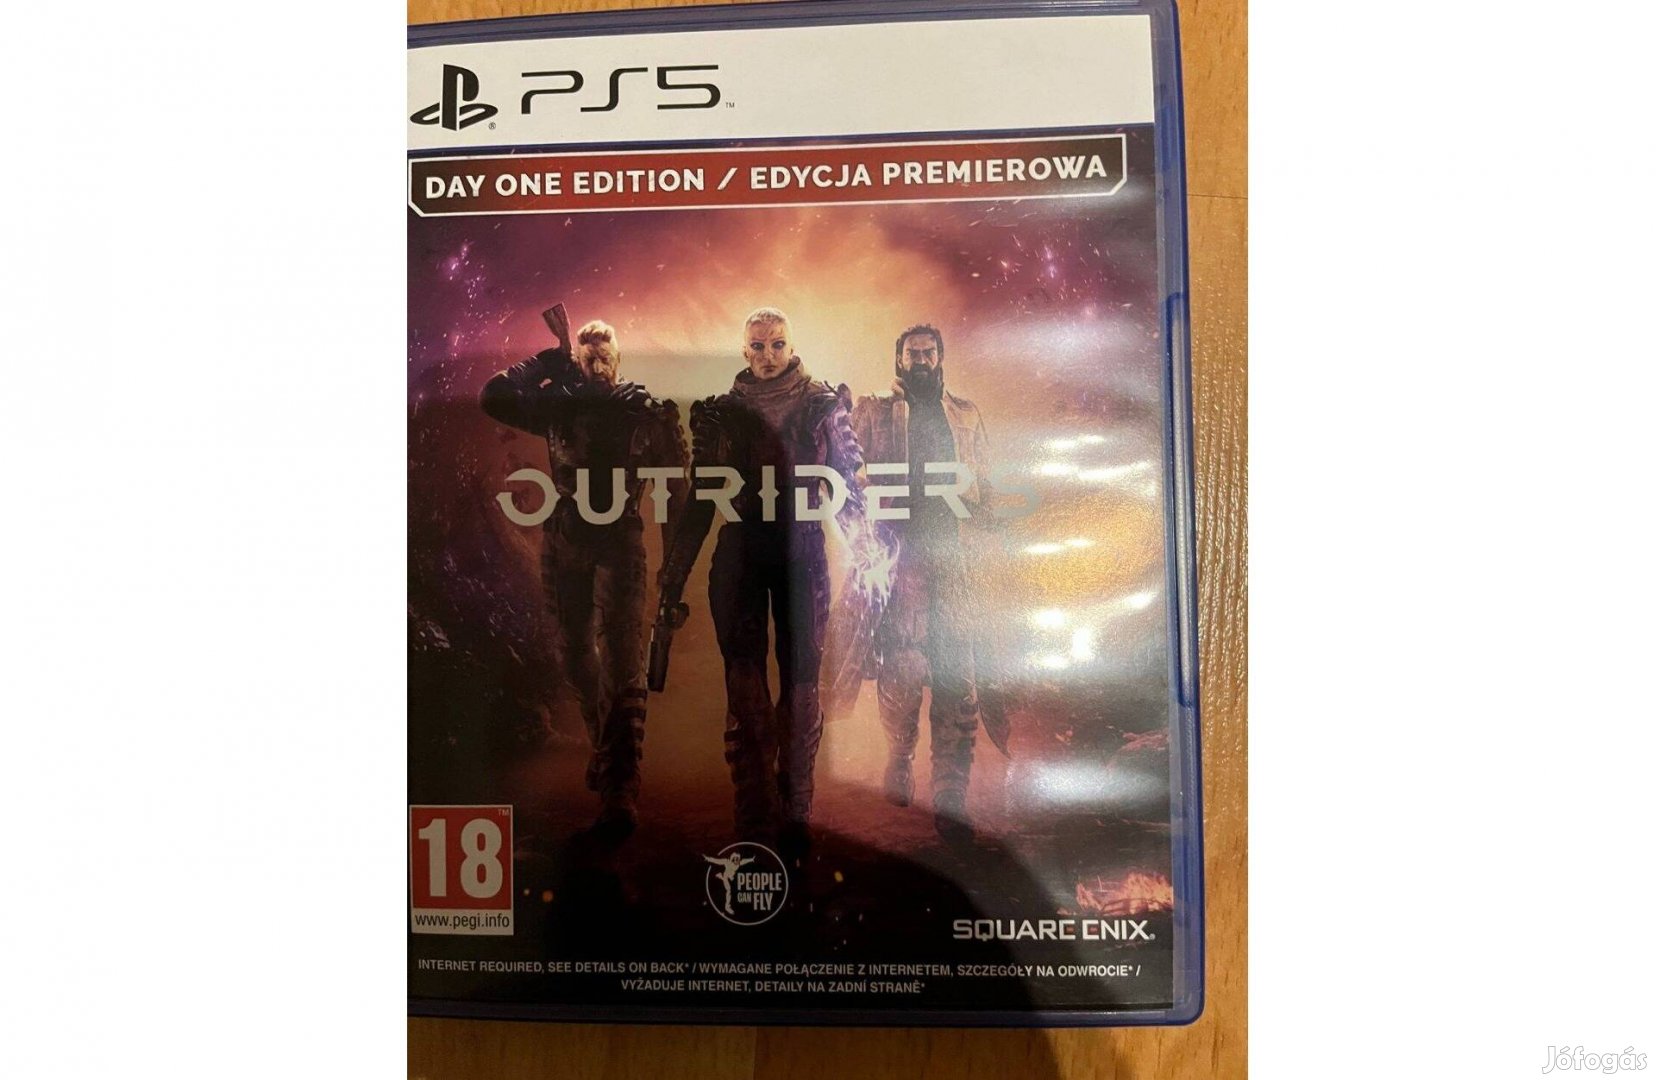 Ps5-Outriders - Day One Edition